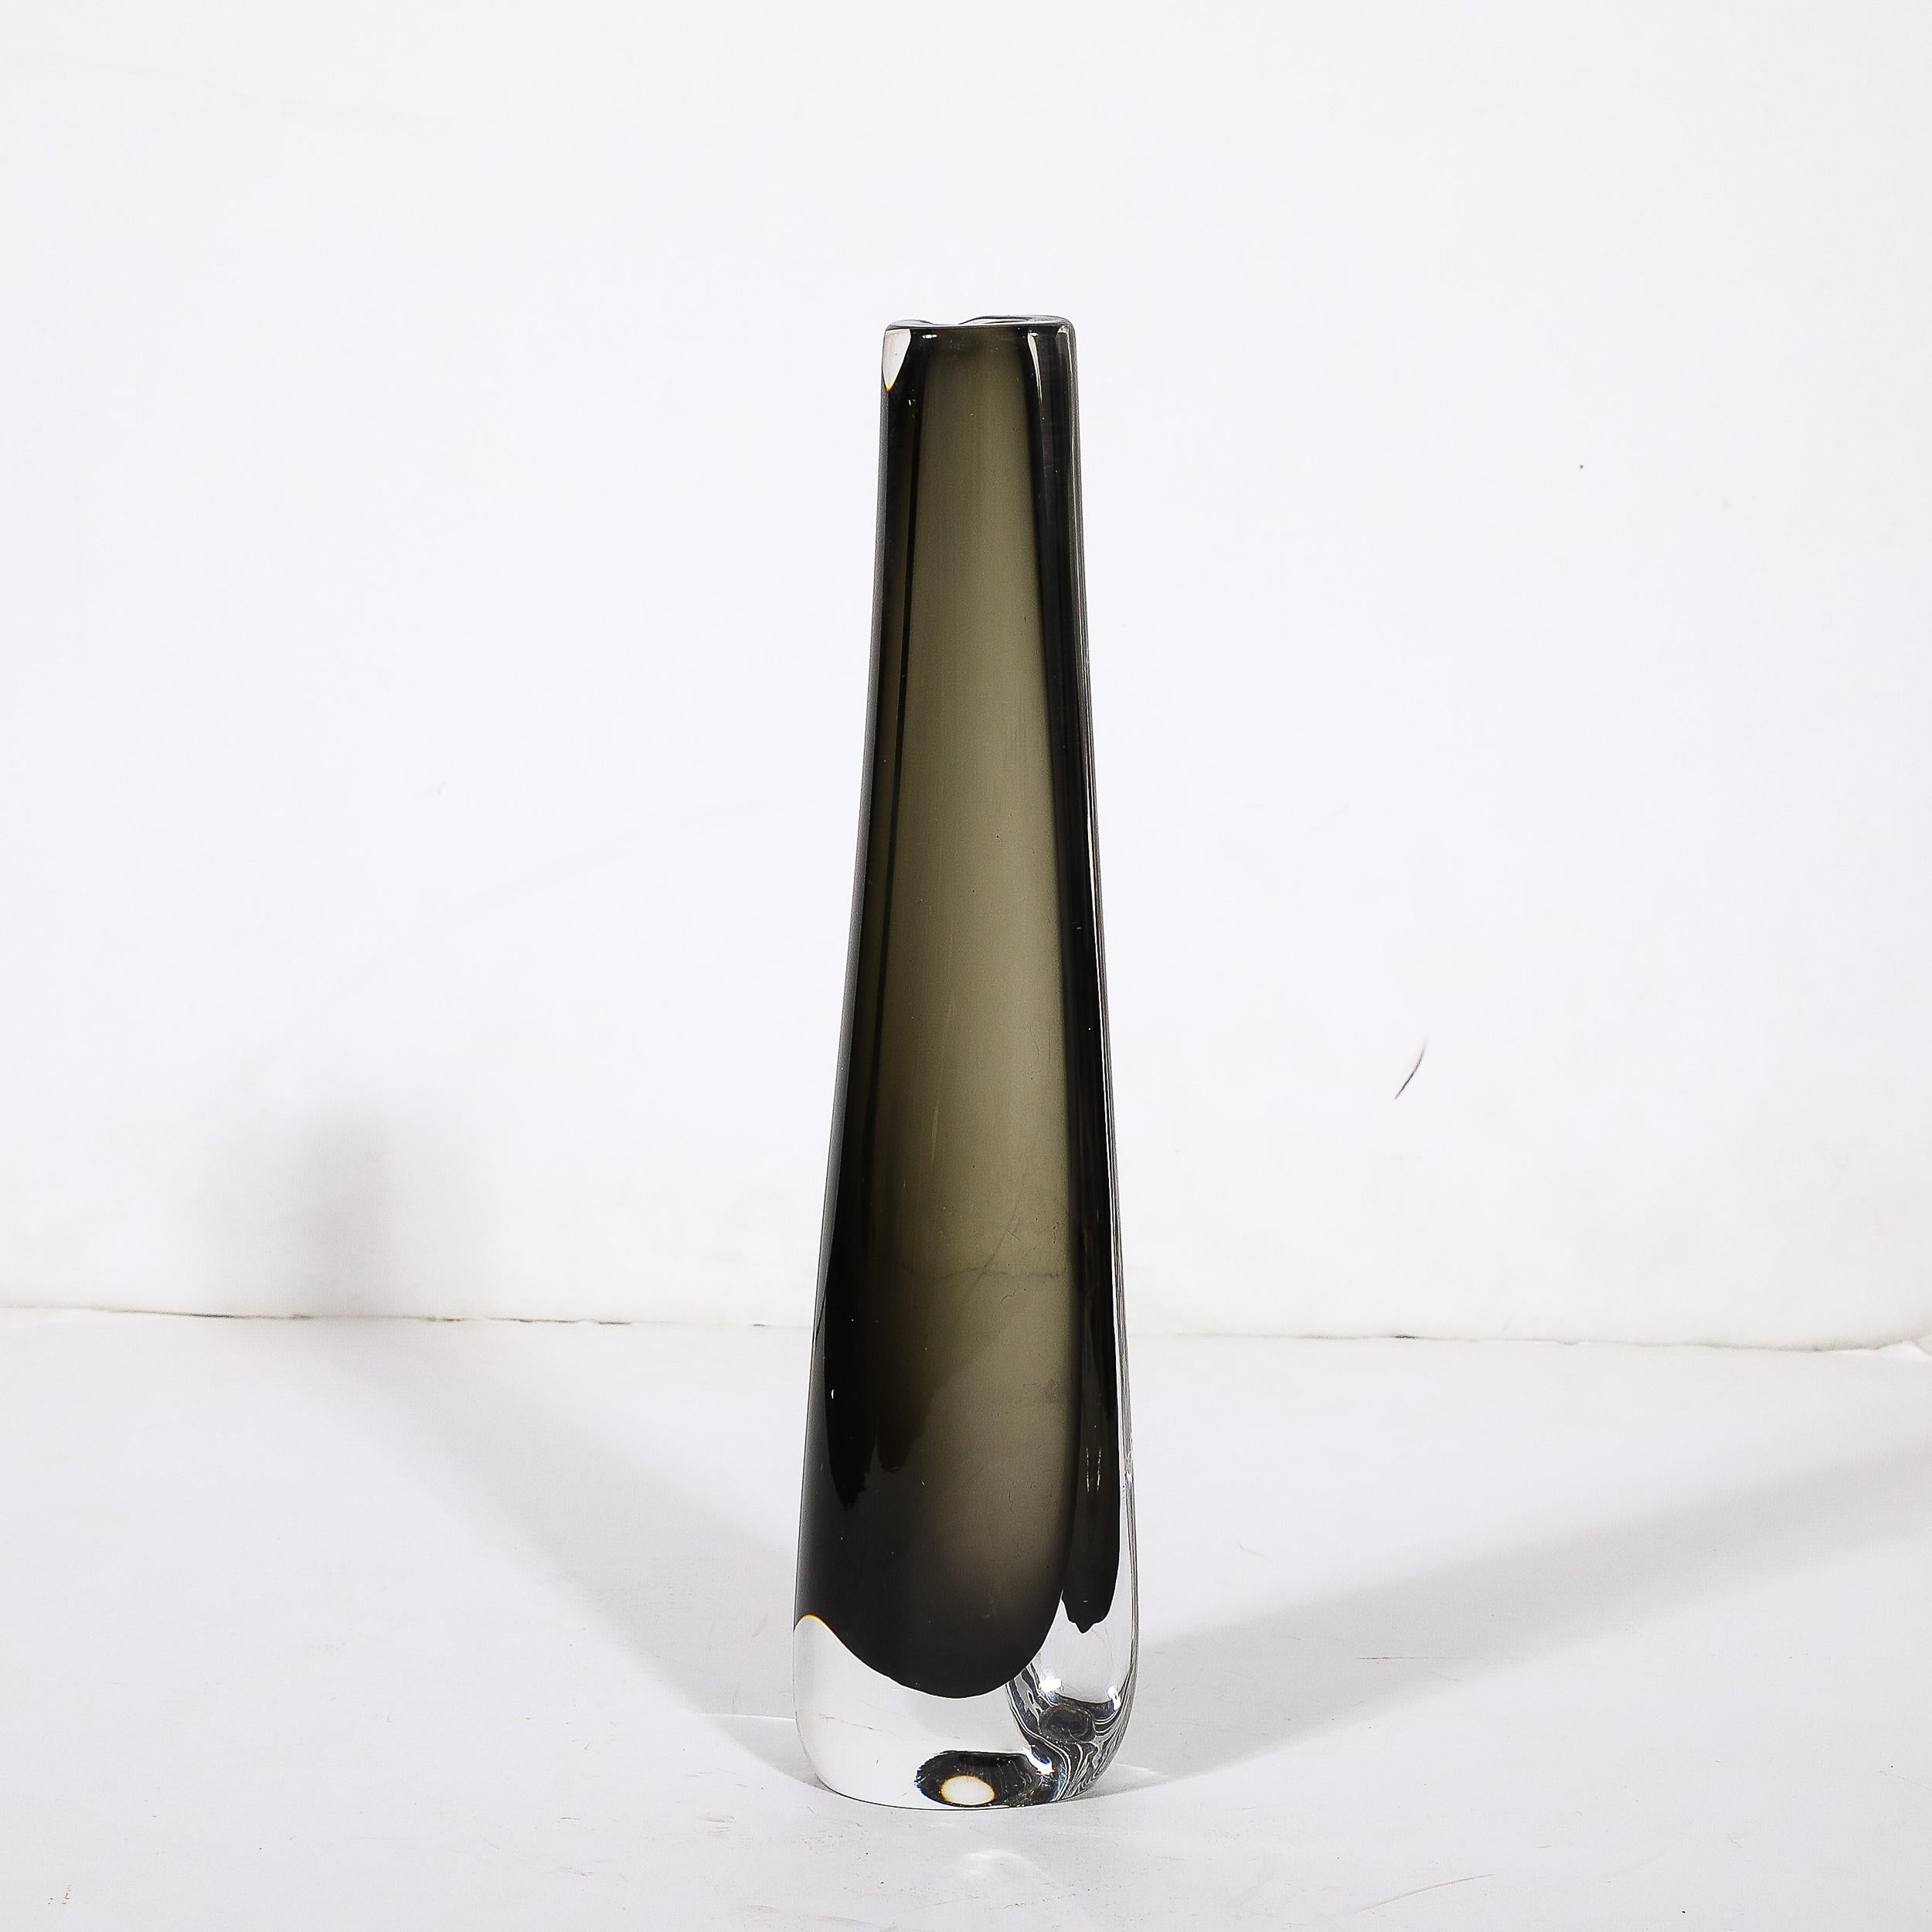 This sleek and reserved Mid-Century Modernist Slender Smoked Glass Vase is by Nils Landberg for the esteemed art glass company Orrefors, and originates from Sweden, Circa 1960. Features a flattened base with transparent glass on the outside surface